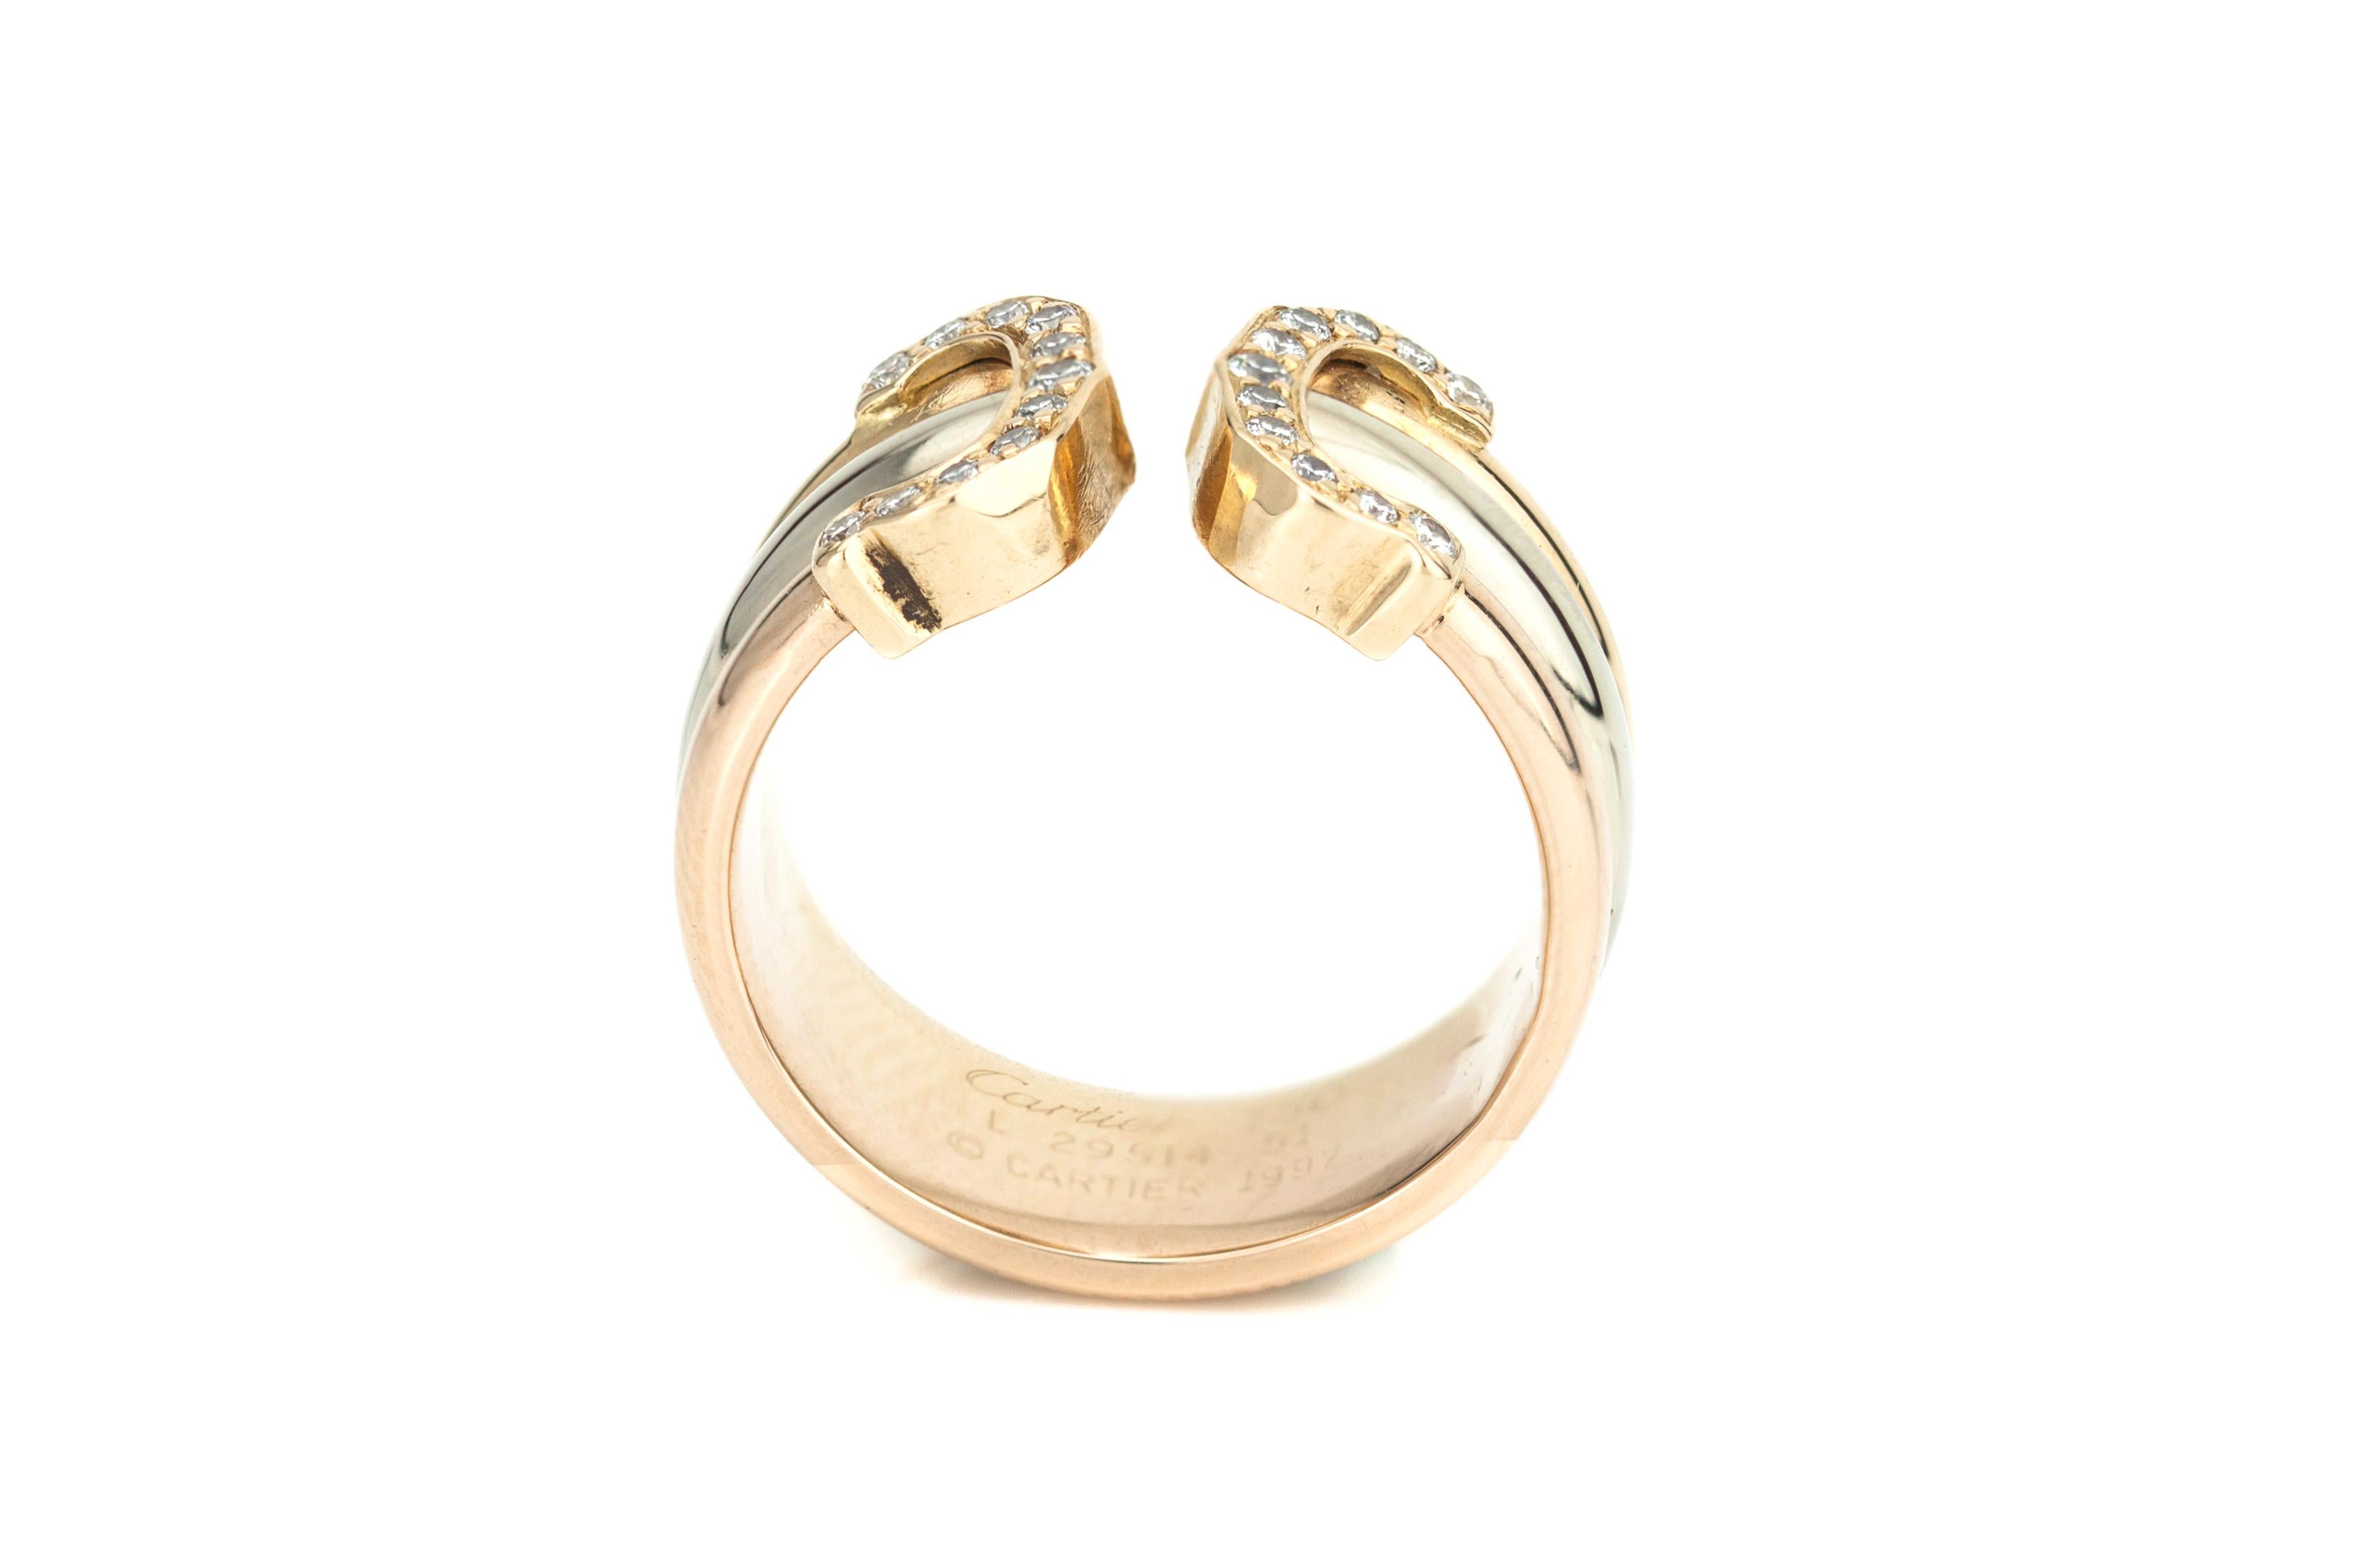 Women's 18kt Gold Ladies Cartier Ring with Diamonds, Made in France, Paris, circa 1990s